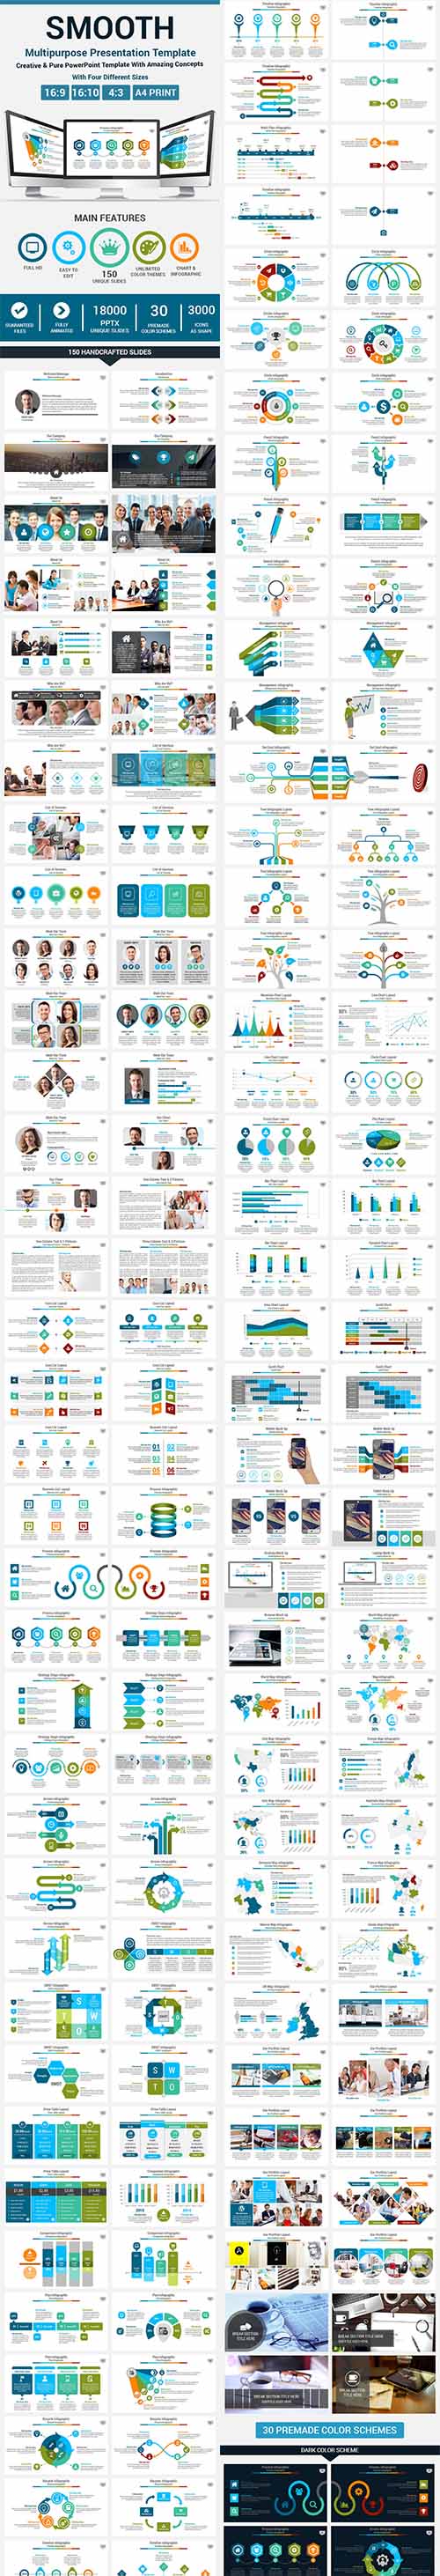 GraphicRiver - Smooth PowerPoint Presentation Template 11266219